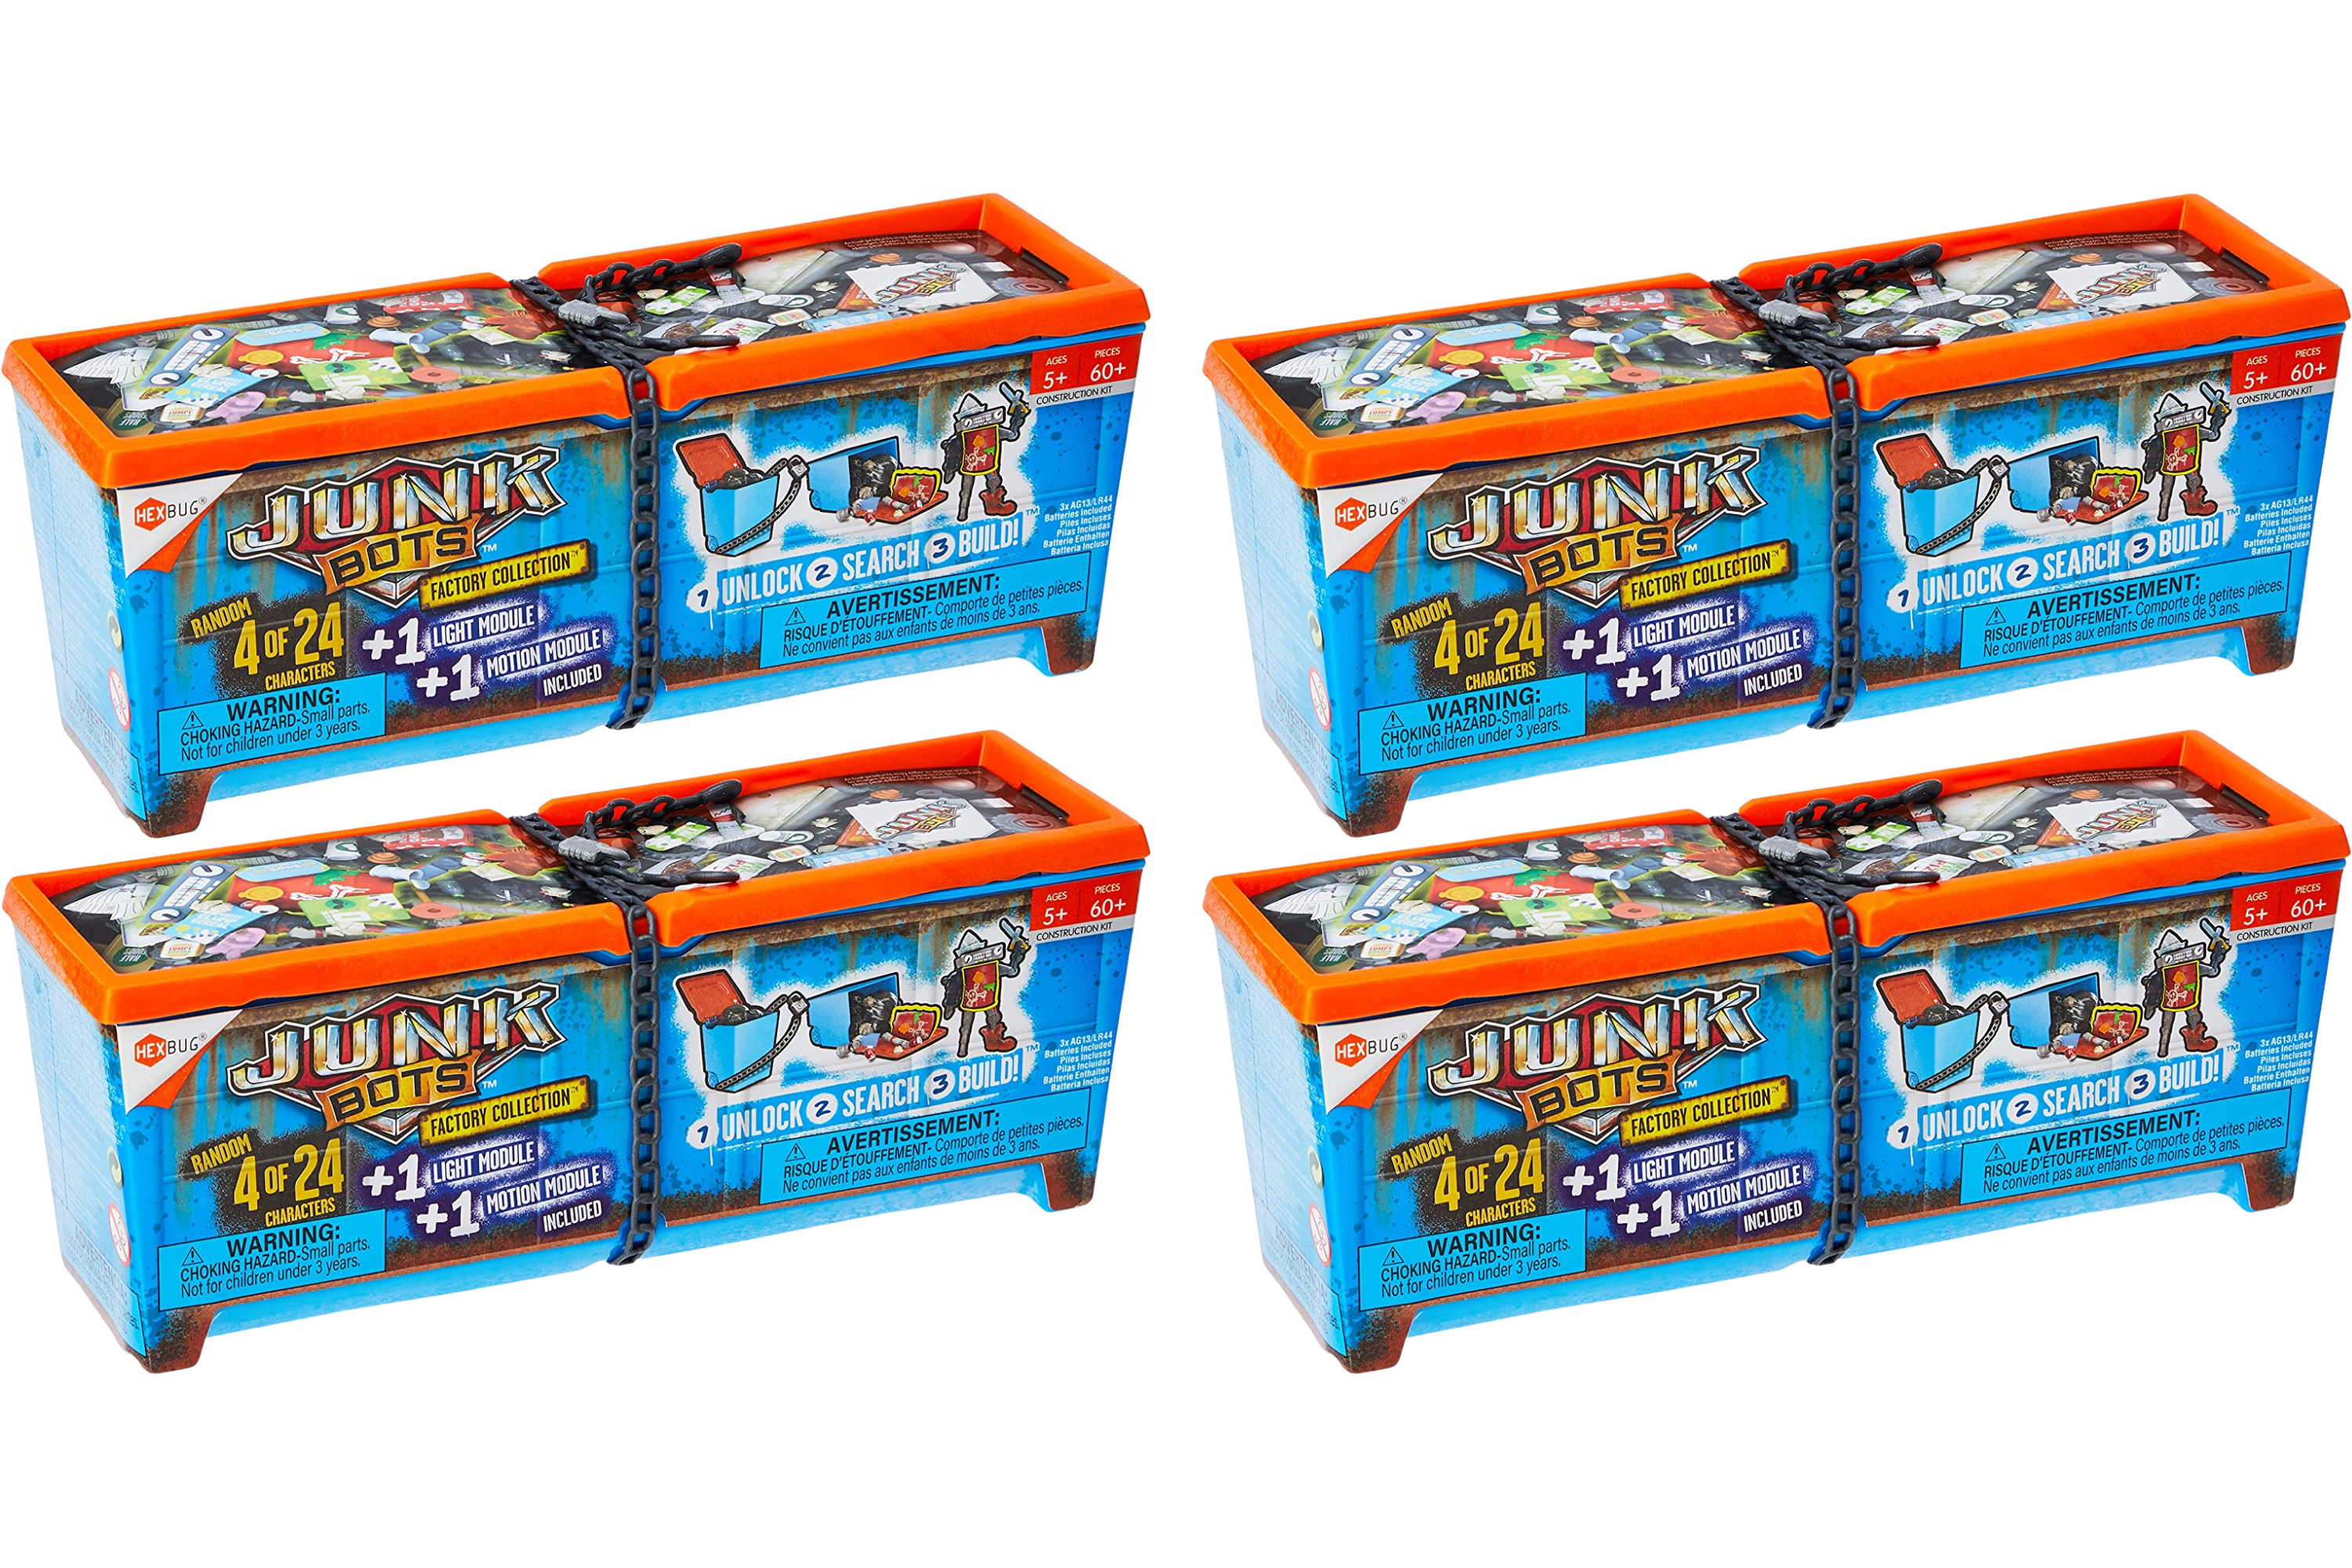 Hexbug Junkbots - Industrial Dumpster With 4 Unique Characters to Assemble in Each Box - Pack of 4 - Toptoys2u